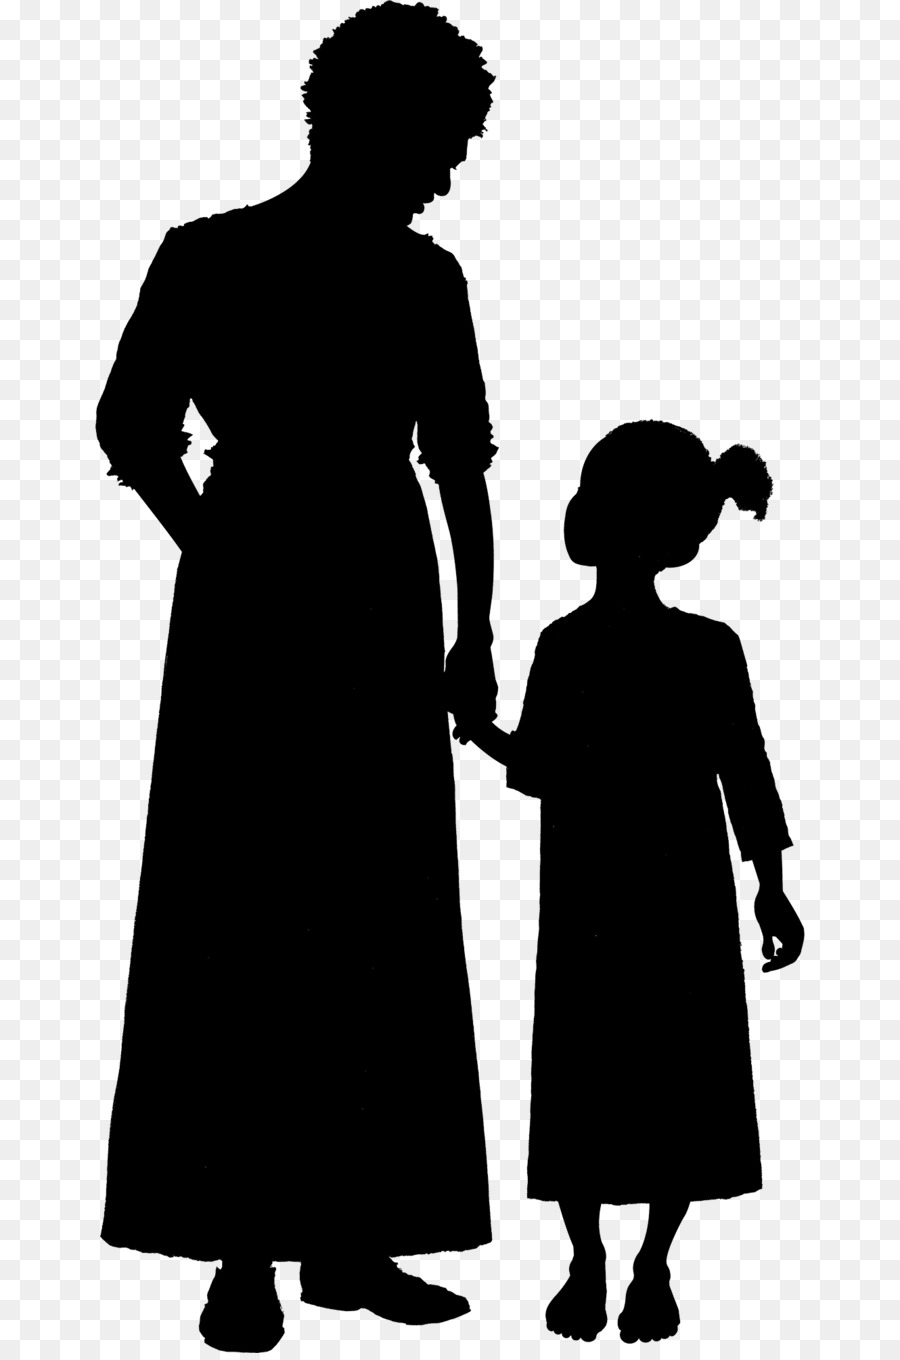 Silhouette Woman Child Clip Art   Old Woman - Old Woman Black And White, Transparent background PNG HD thumbnail